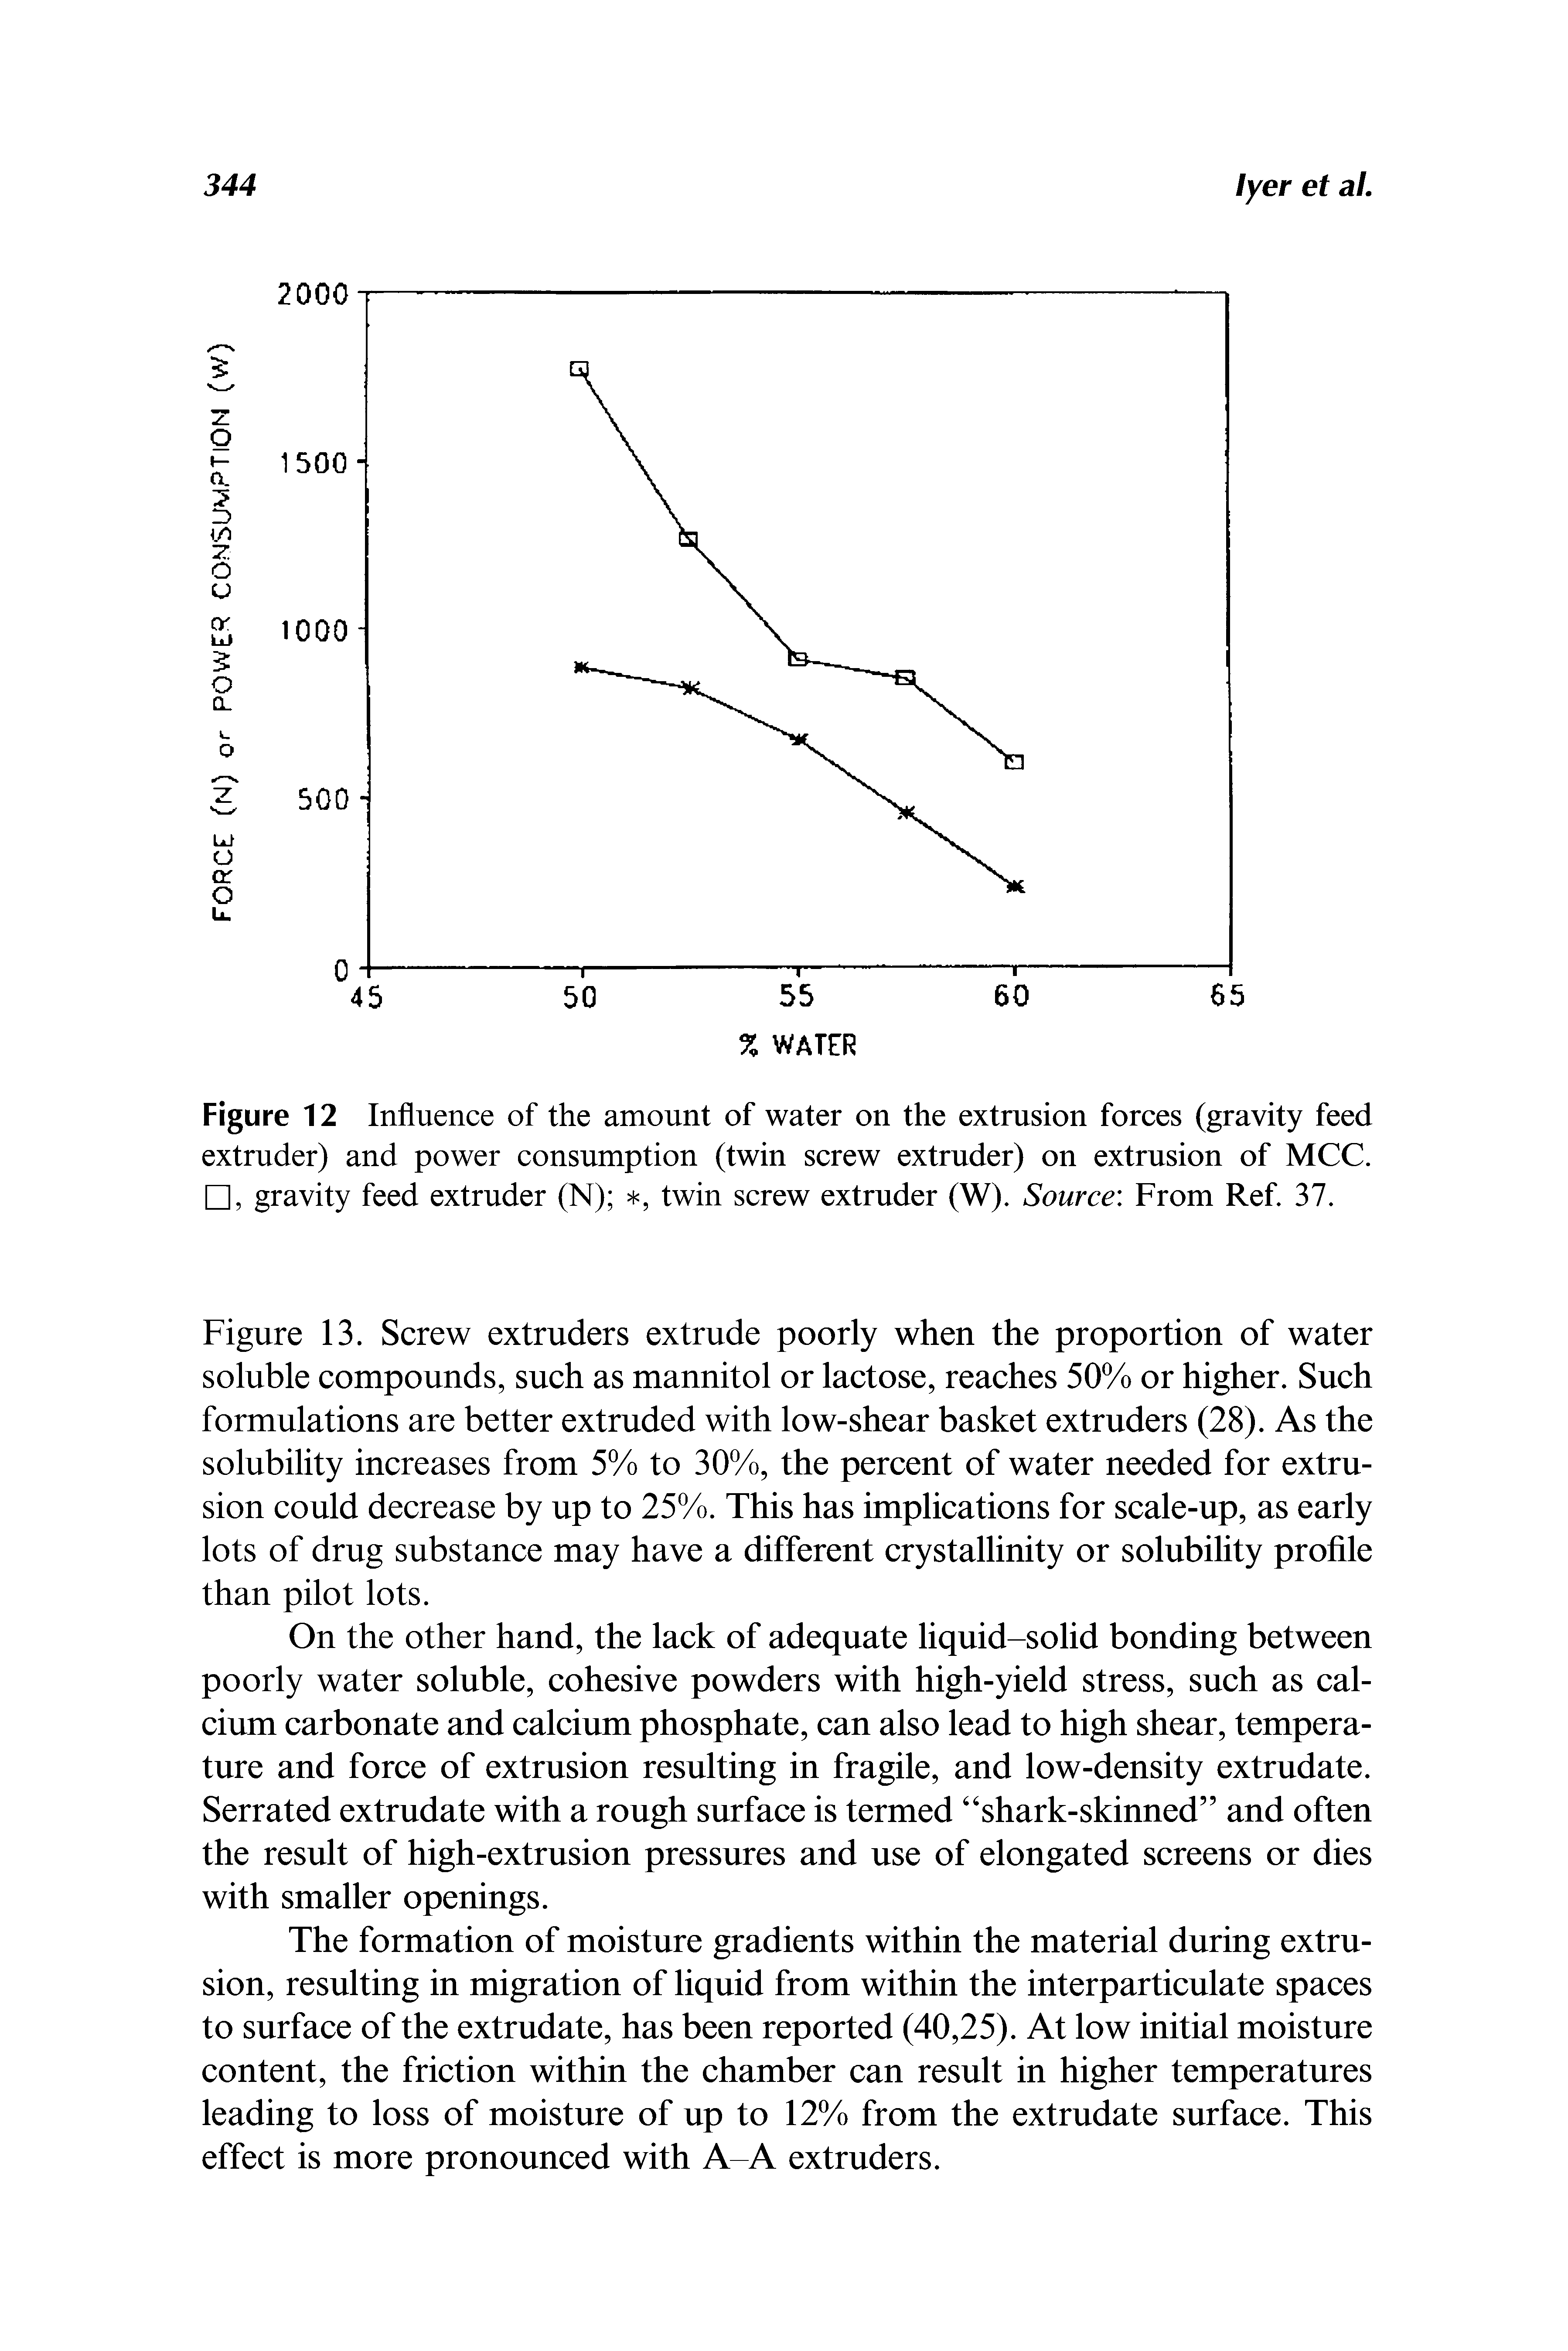 Figure 13. Screw extruders extrude poorly when the proportion of water soluble compounds, such as mannitol or lactose, reaches 50% or higher. Such formulations are better extruded with low-shear basket extruders (28). As the solubility increases from 5% to 30%, the percent of water needed for extrusion could decrease by up to 25%. This has implications for scale-up, as early lots of drug substance may have a different crystallinity or solubility profile than pilot lots.